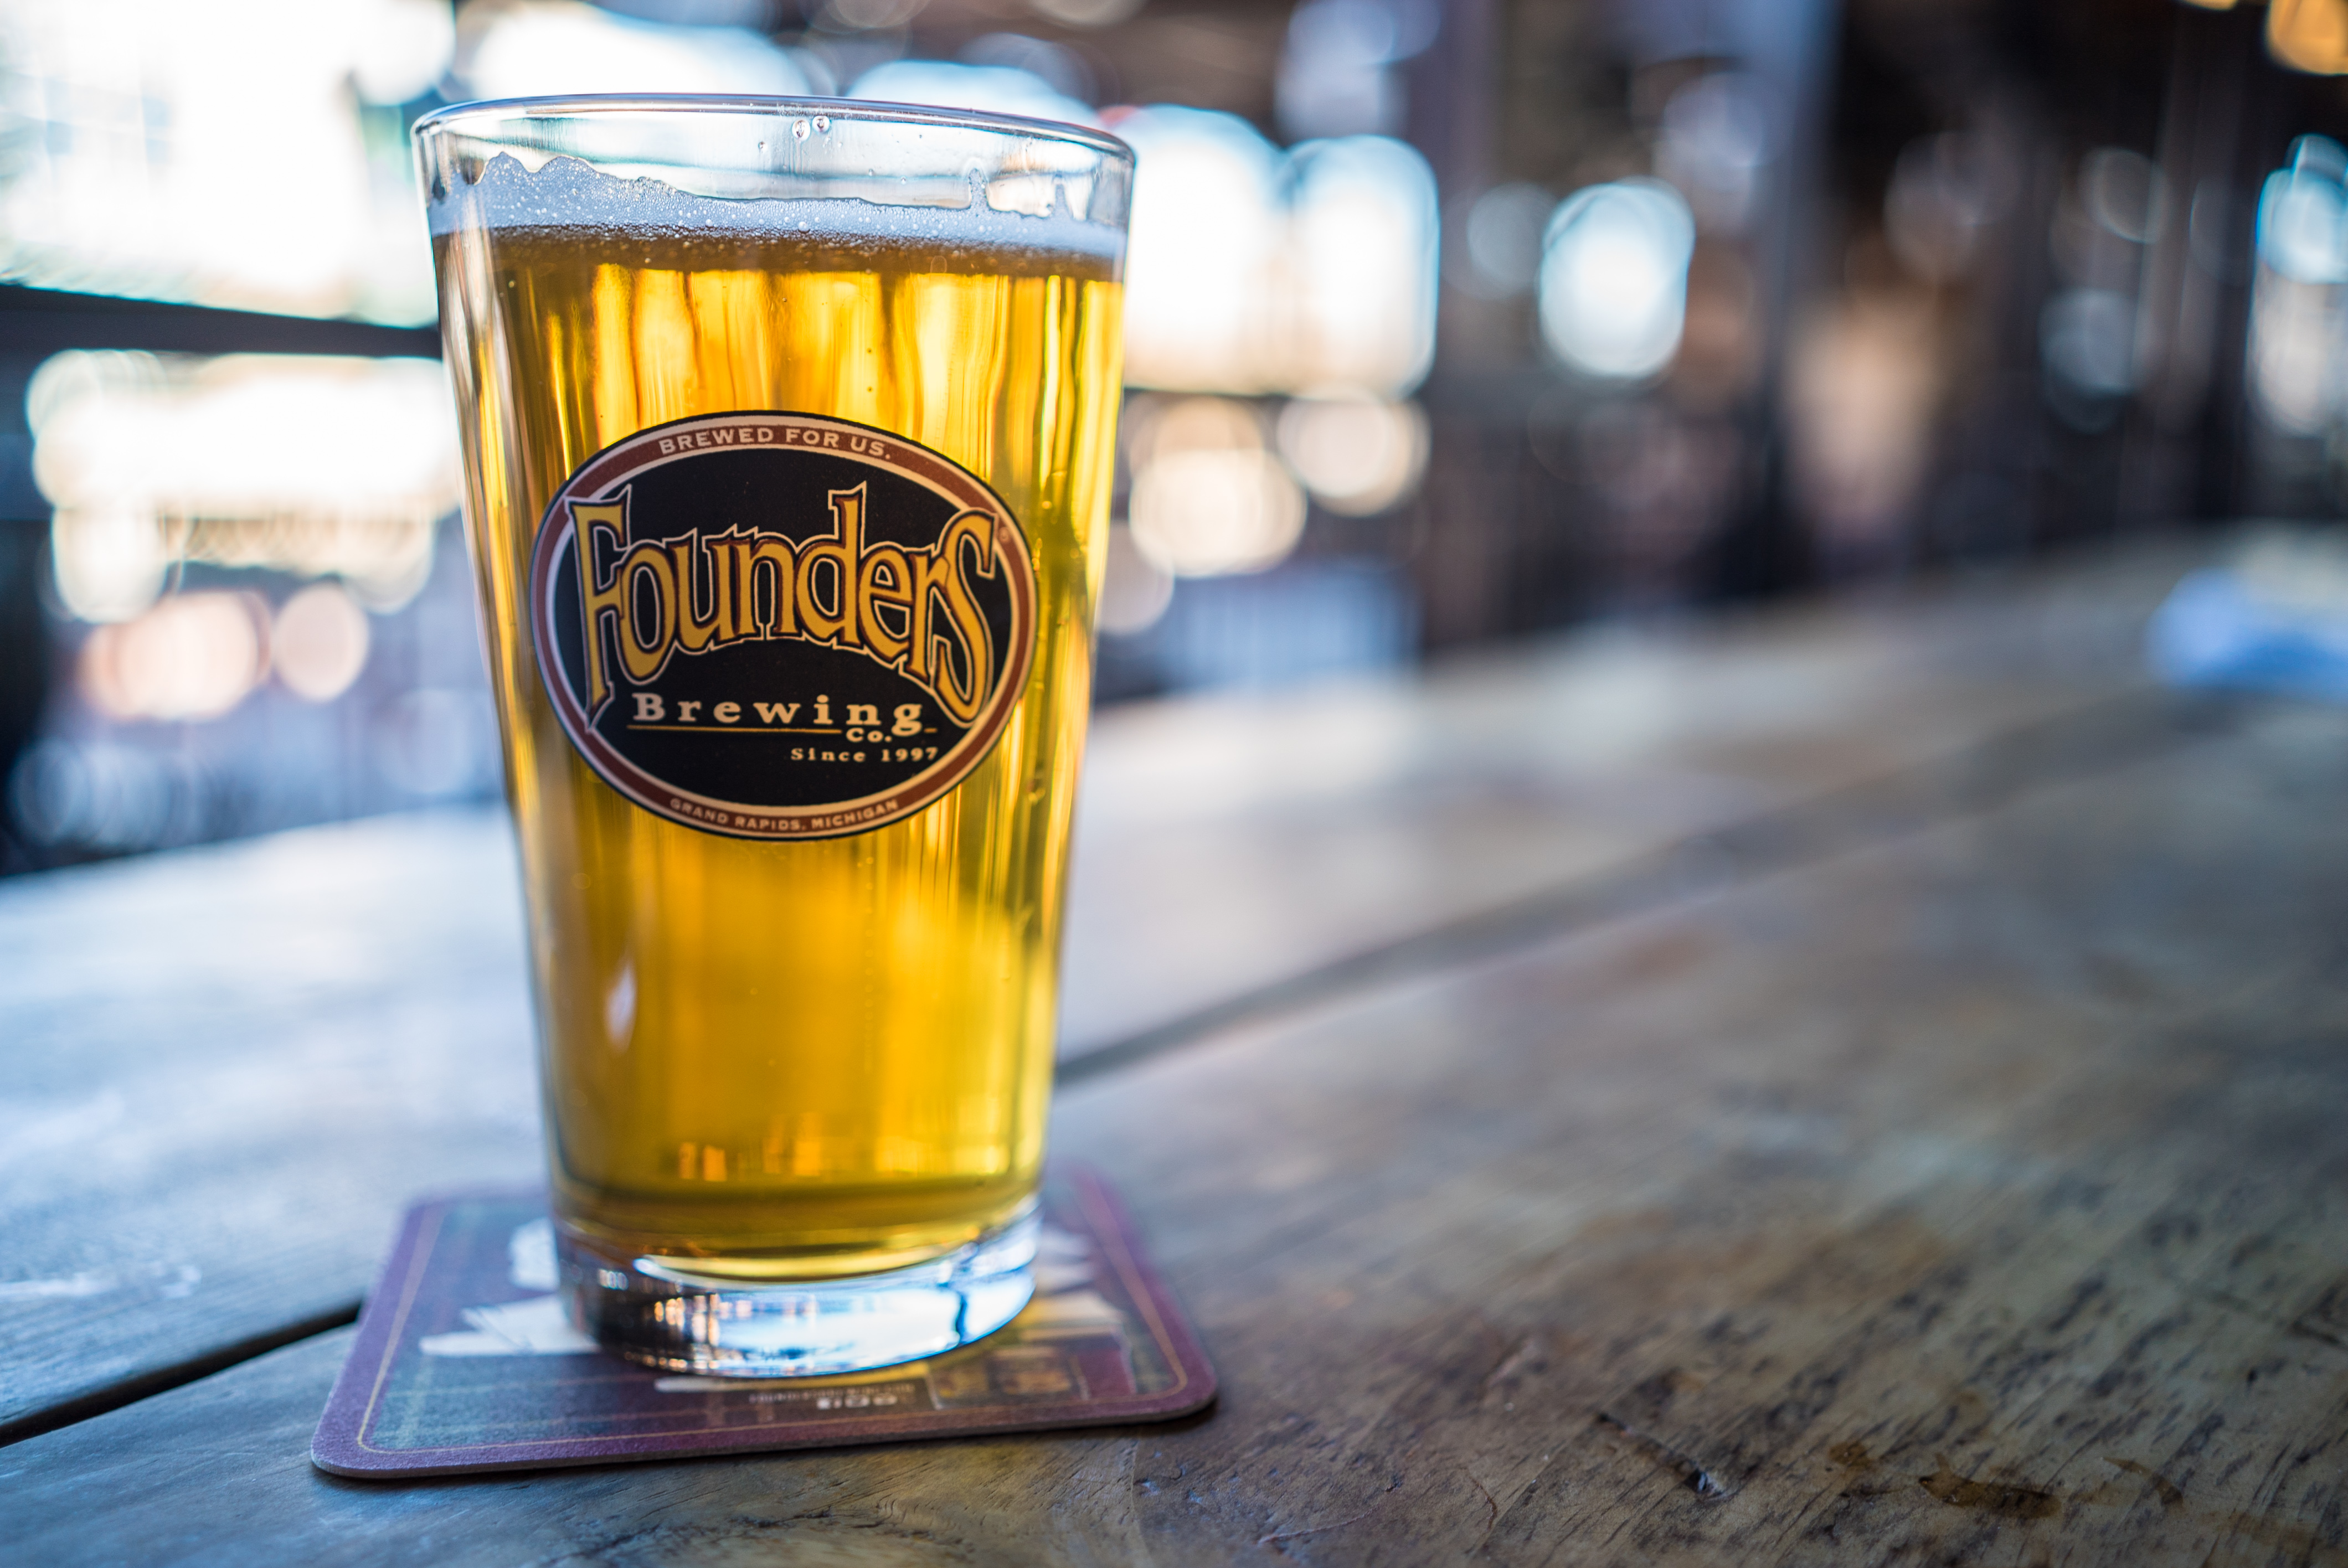 https://assets.simpleviewinc.com/simpleview/image/upload/crm/grandrapids/Founders-Brewing-Co.-Beer_0118AC79-5056-A36A-0681A0AF541FB84C-0118ab275056a36_0118b2e8-5056-a36a-06fdb5e7177537a6.jpg